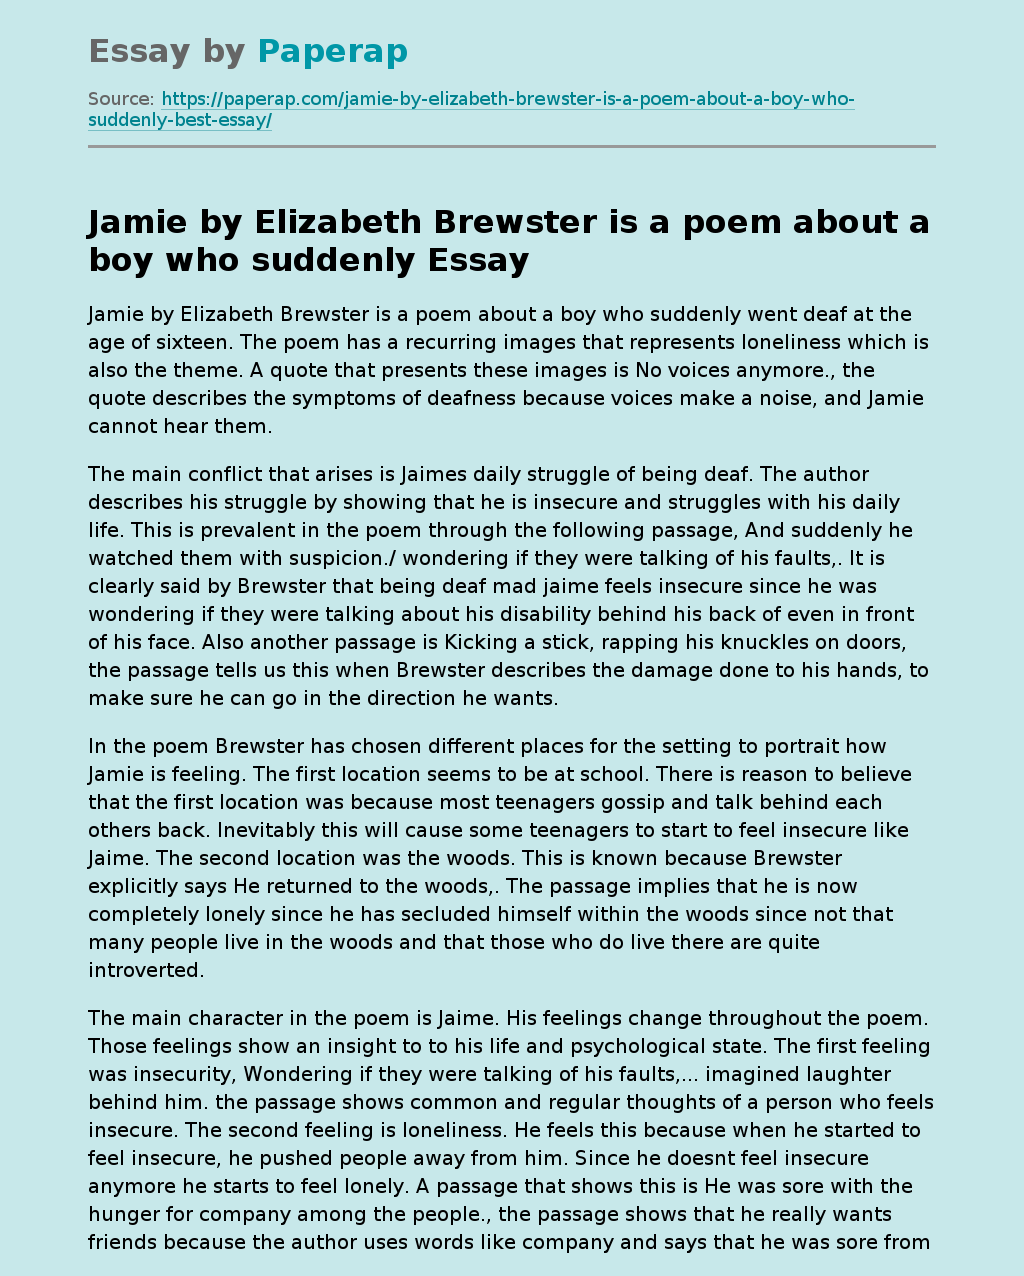 Jamie by Elizabeth Brewster is a poem about a boy who suddenly